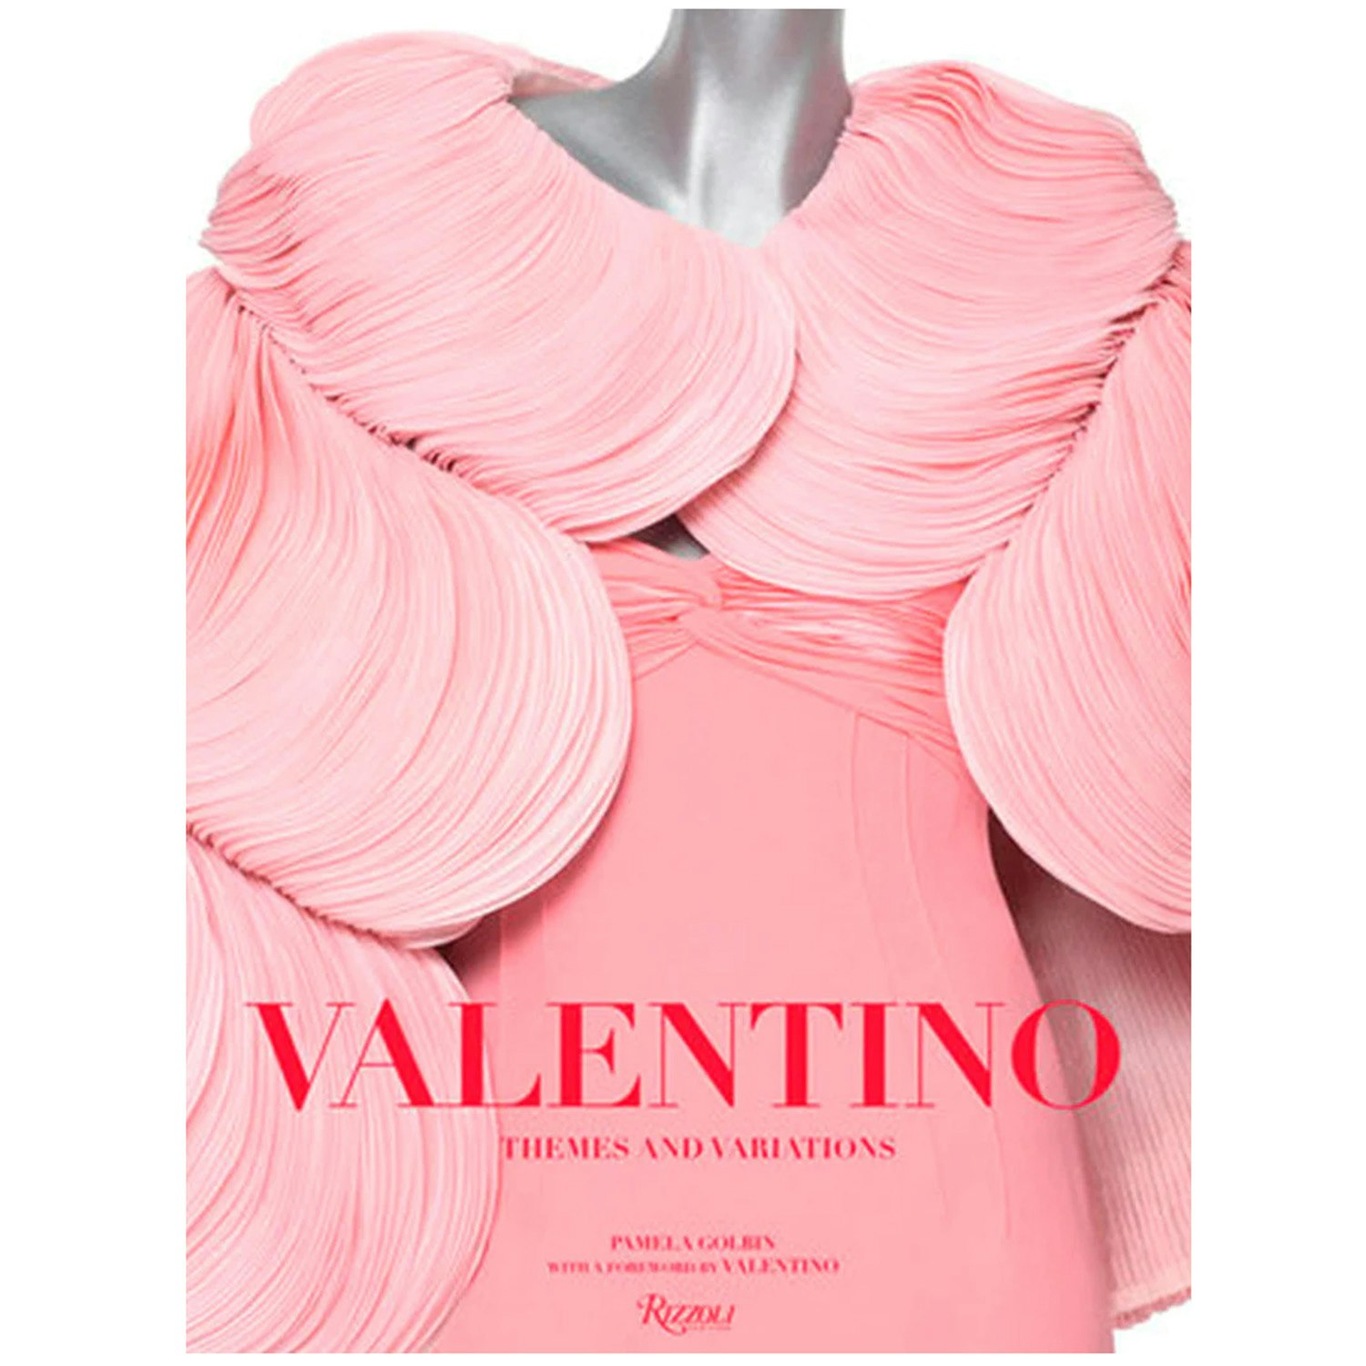 Valentino: Themes and Variations Book